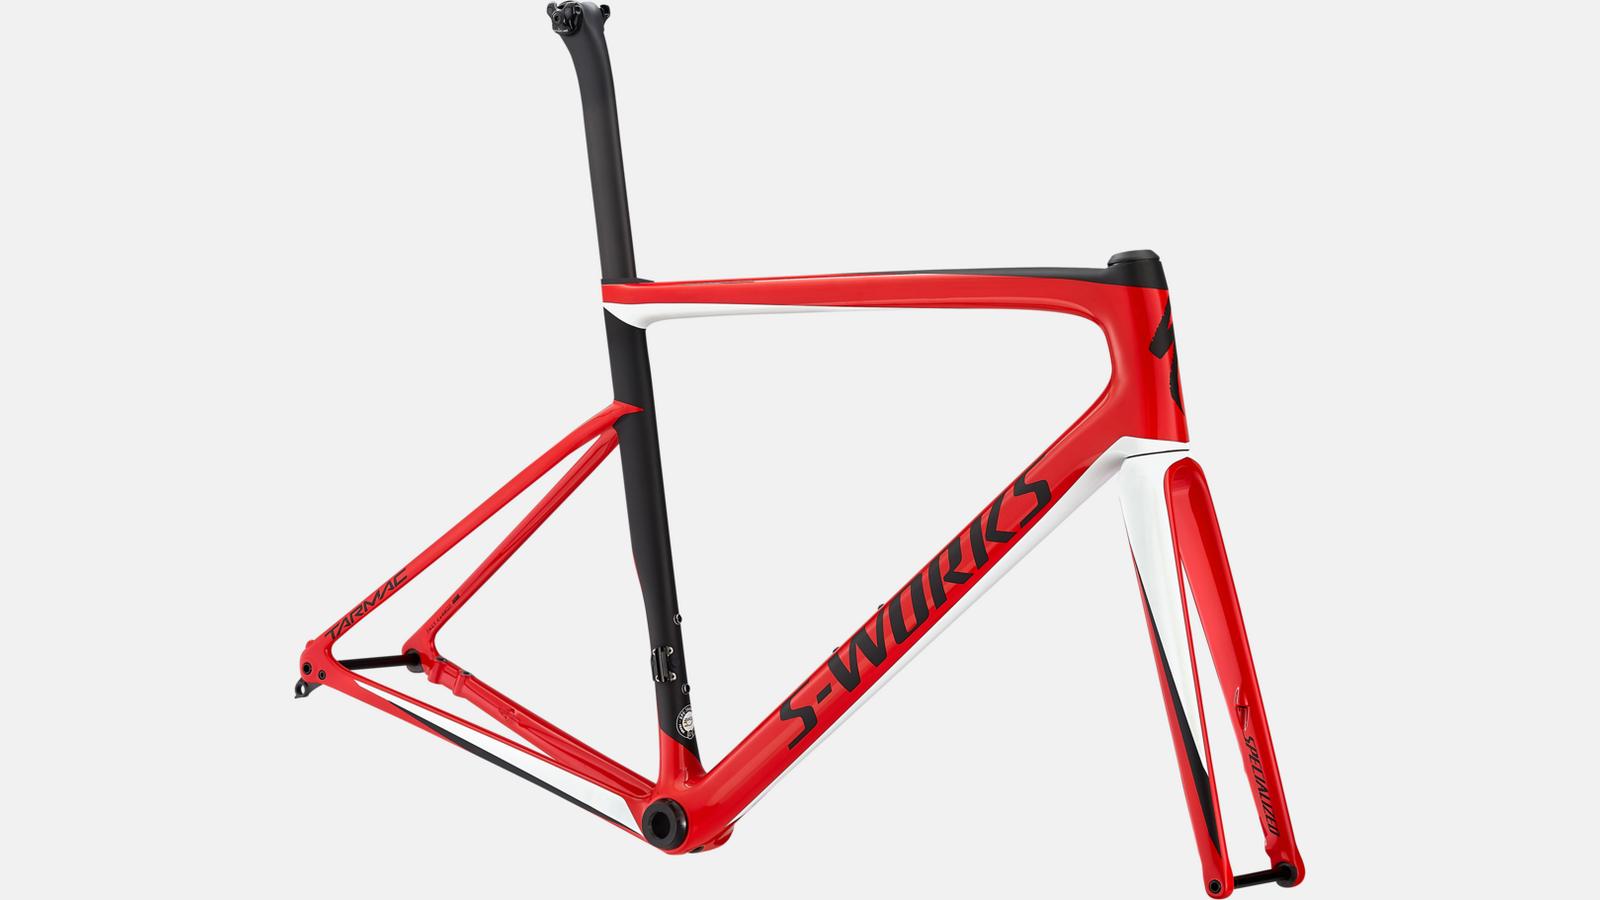 Touch-up paint for 2019 Specialized S-Works Tarmac SL6 Disc Frameset - Gloss Flo Red